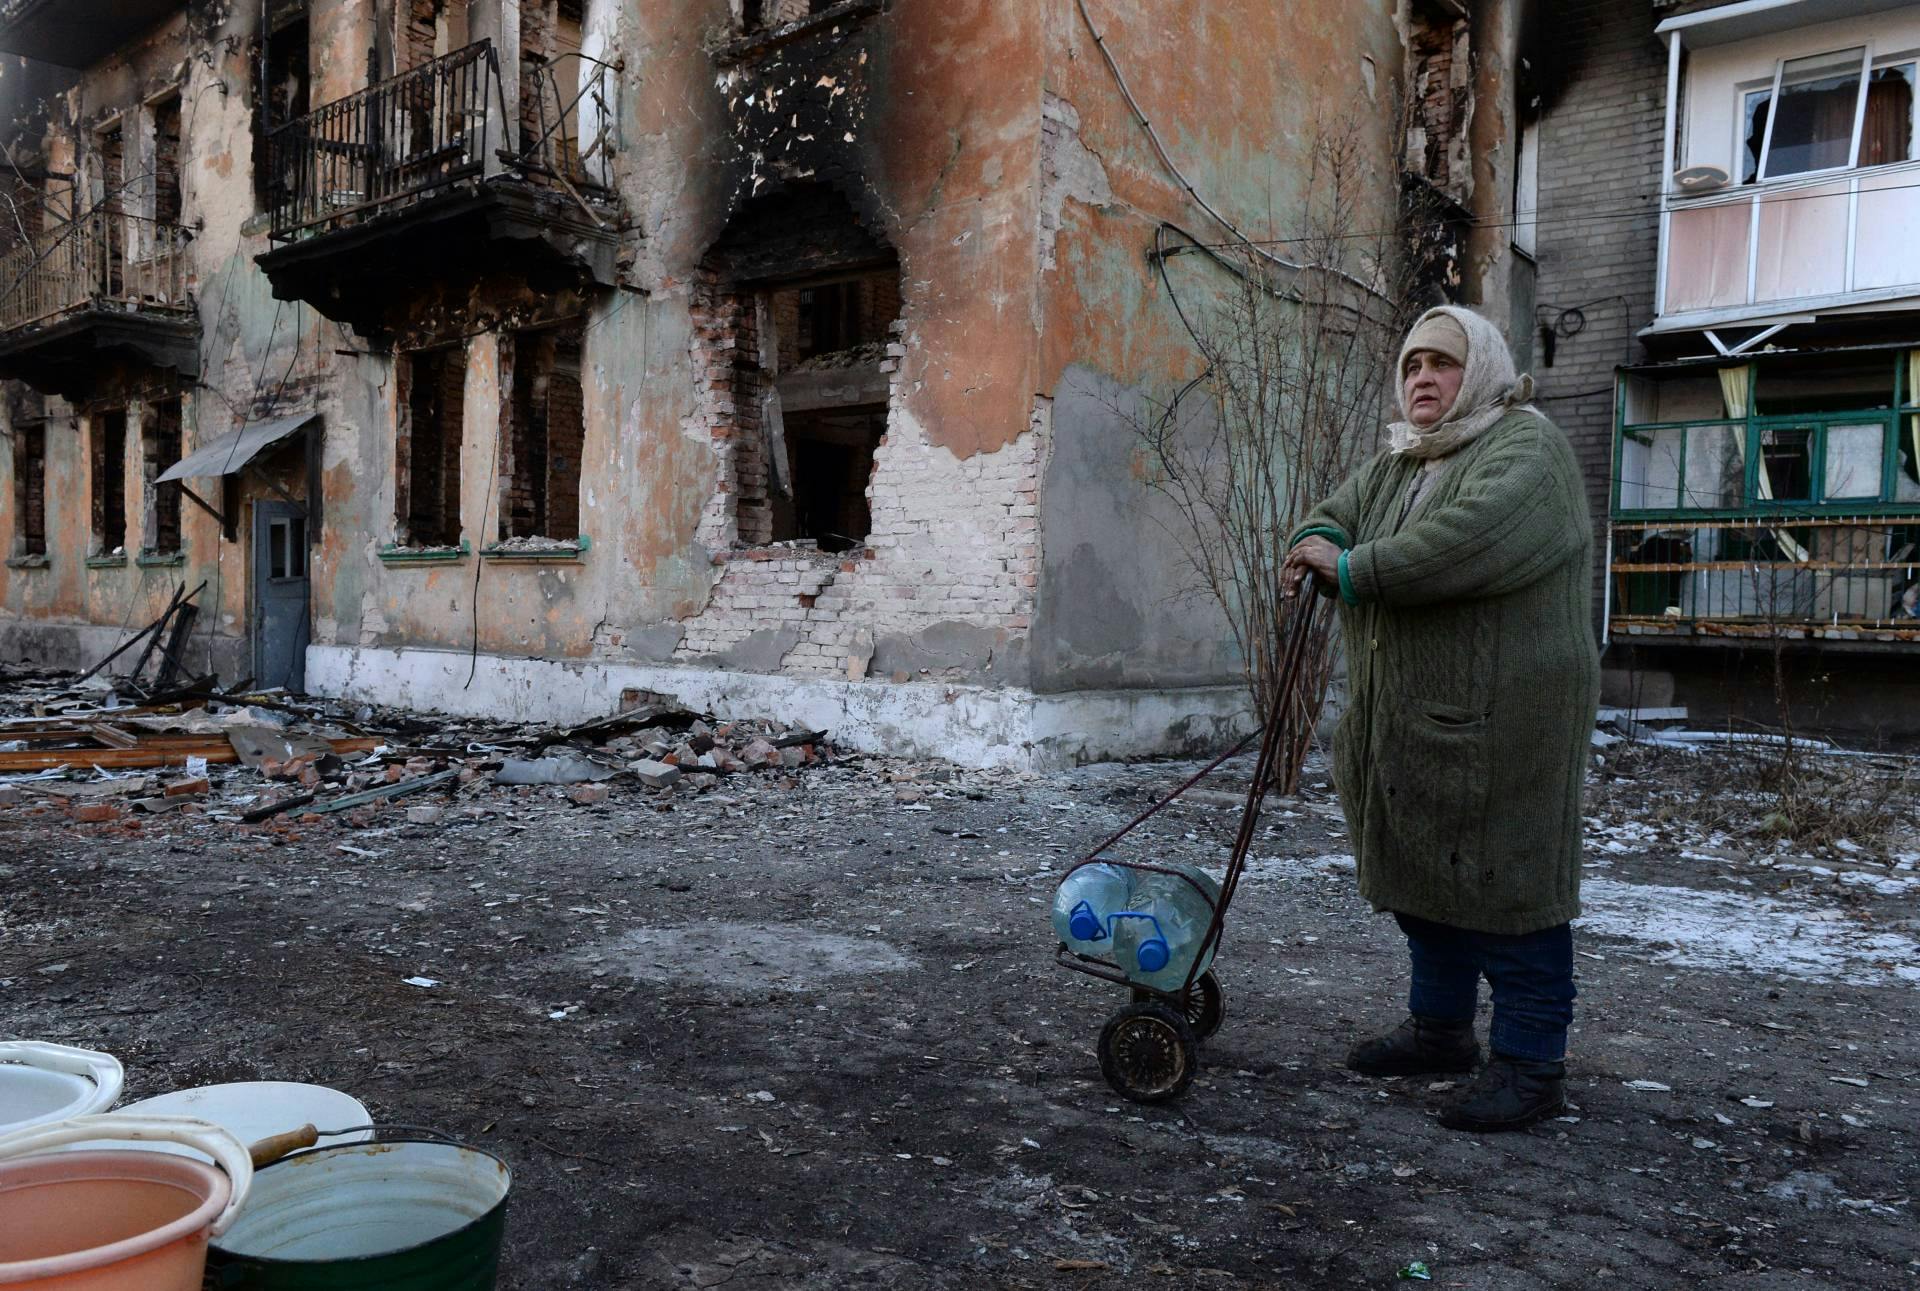 A local woman uses a shopping trolley to carry water containers past a damaged building in the eastern Ukrainian city of Debaltseve in the Donetsk region, on February 20, 2015. The leaders of Ukraine, Germany, France and Russia on February 20 pledged renewed support for a tattered ceasefire in eastern Ukraine despite violations -- including the storming of a key town by pro-Russian rebels. 